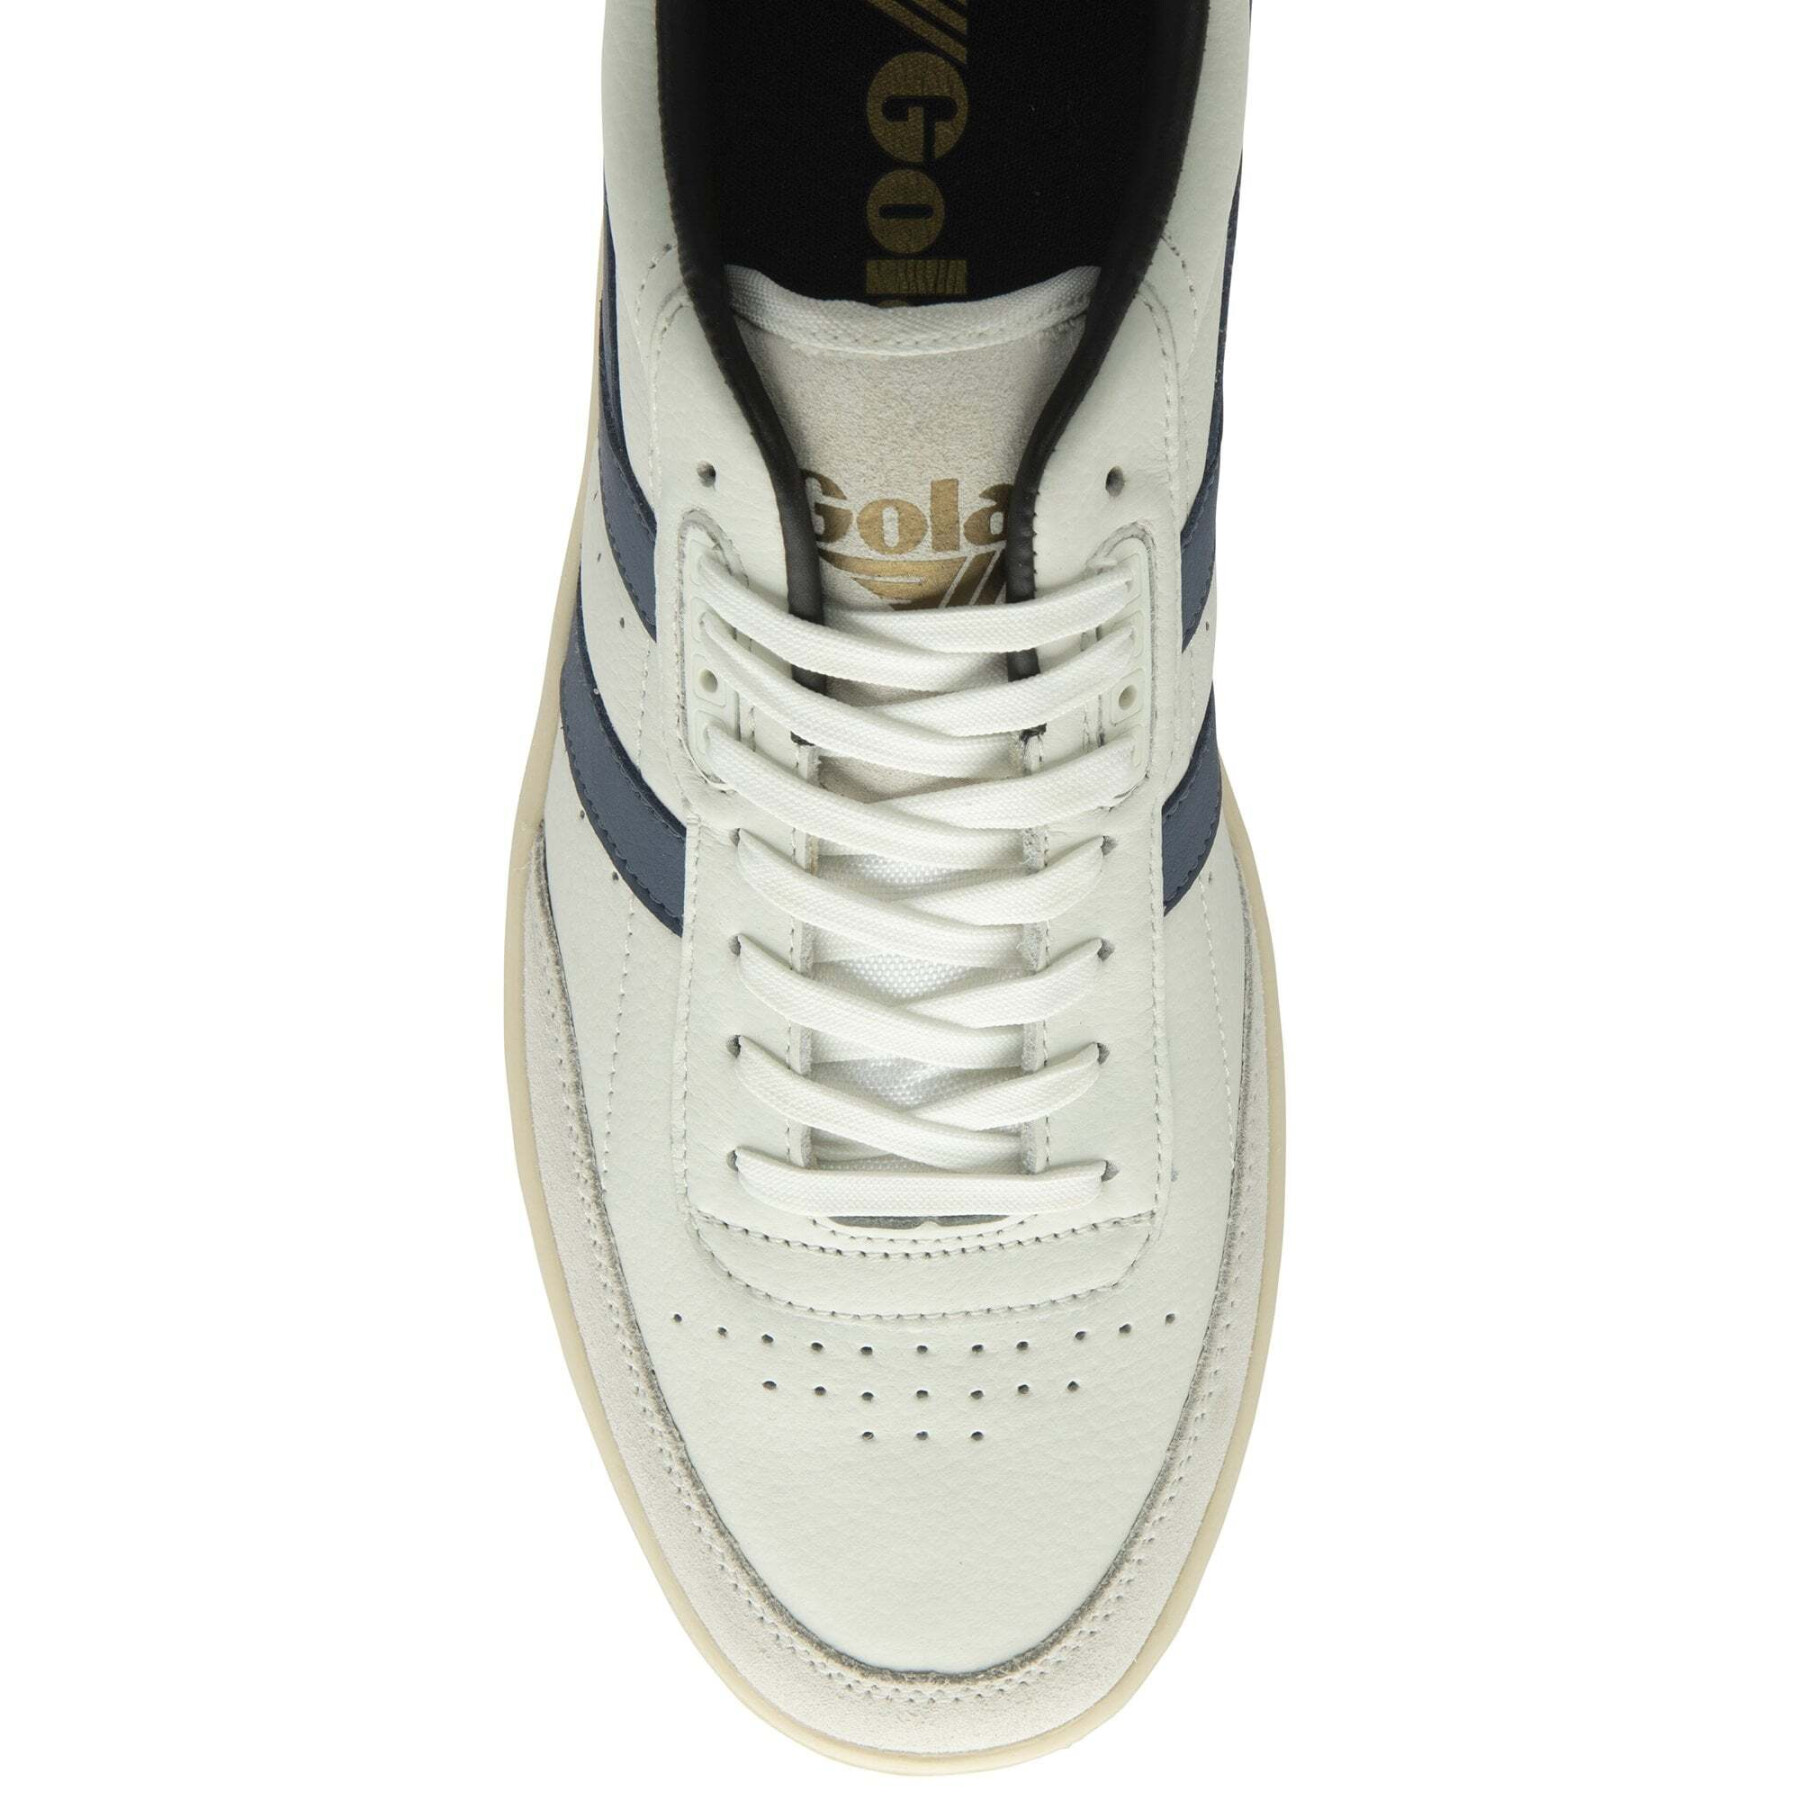 Leather sneakers woman Gola Contact